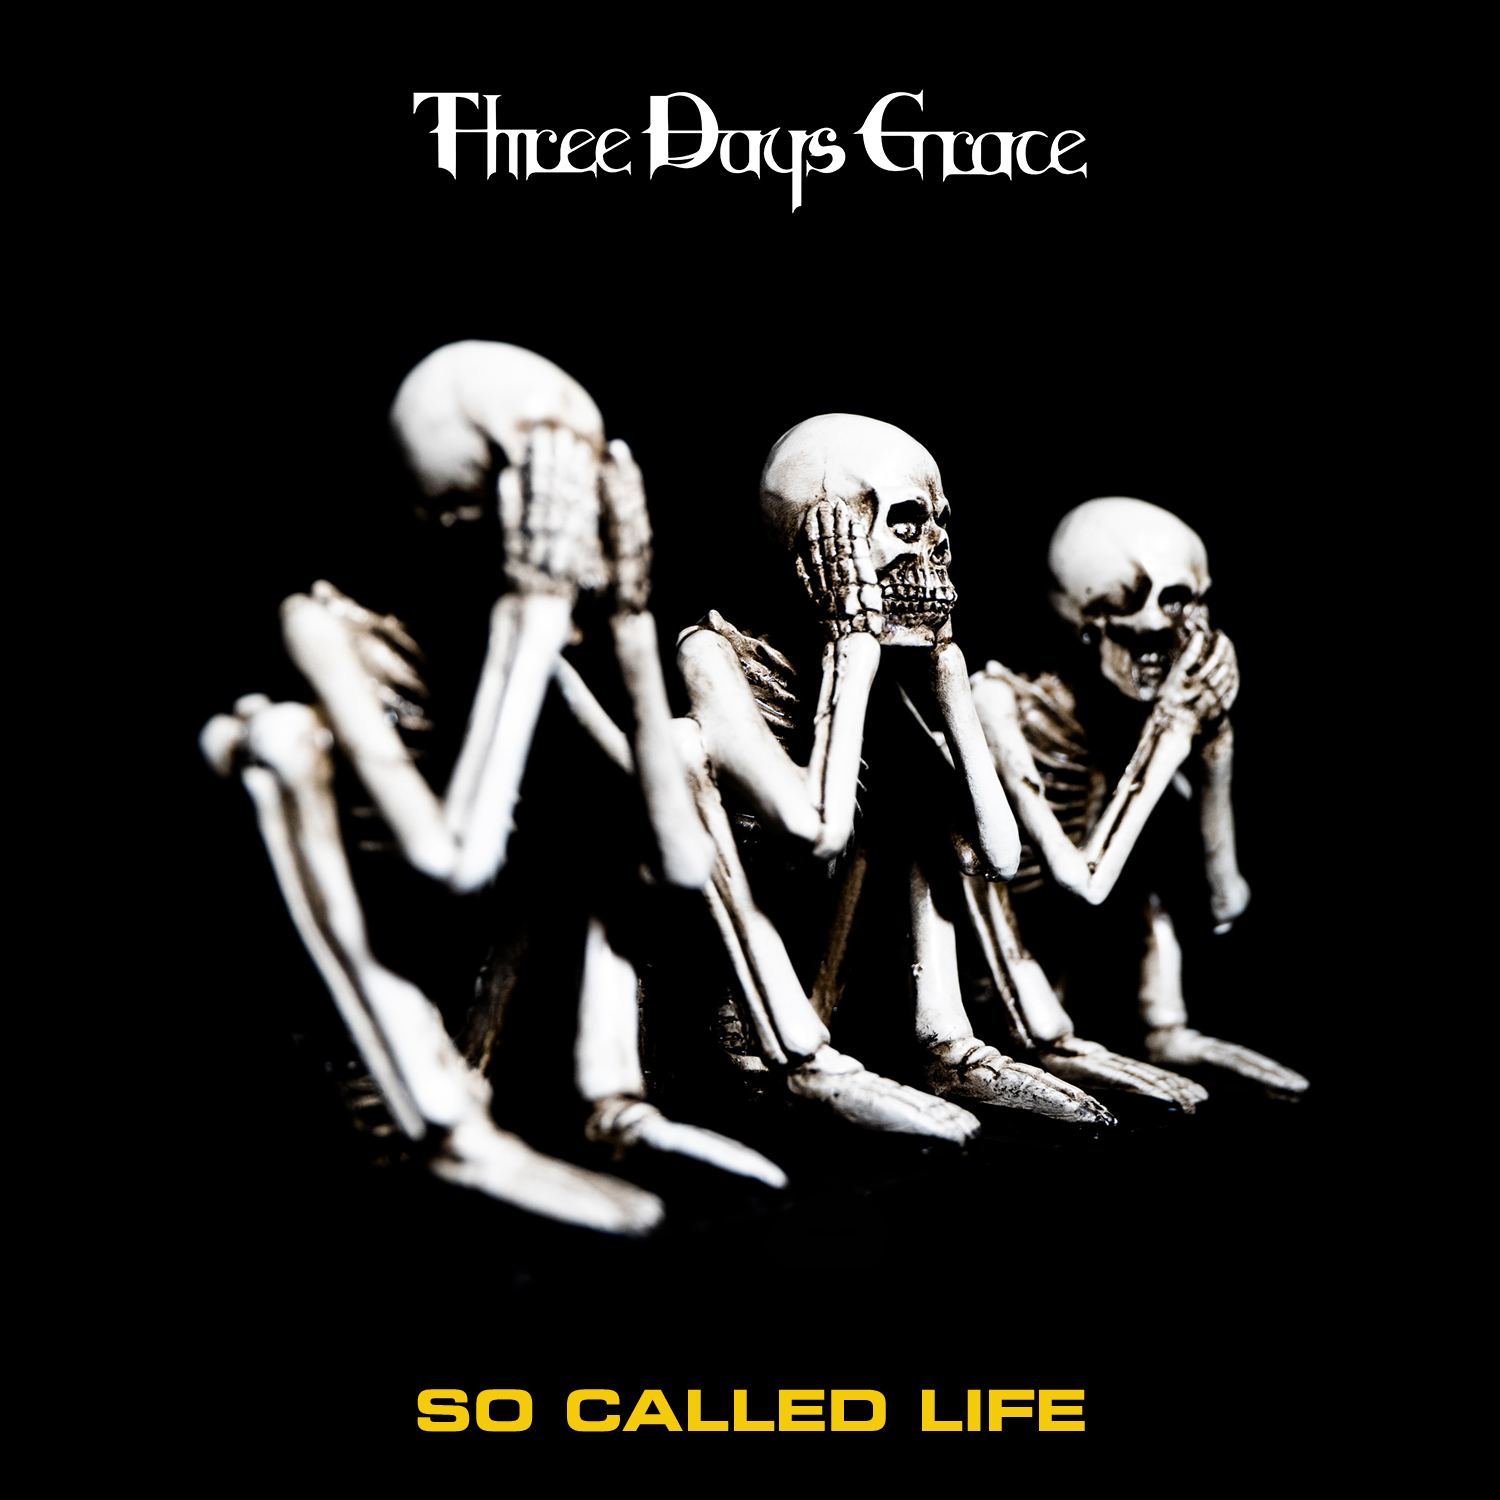 New Single “So Called Life” Out November 29